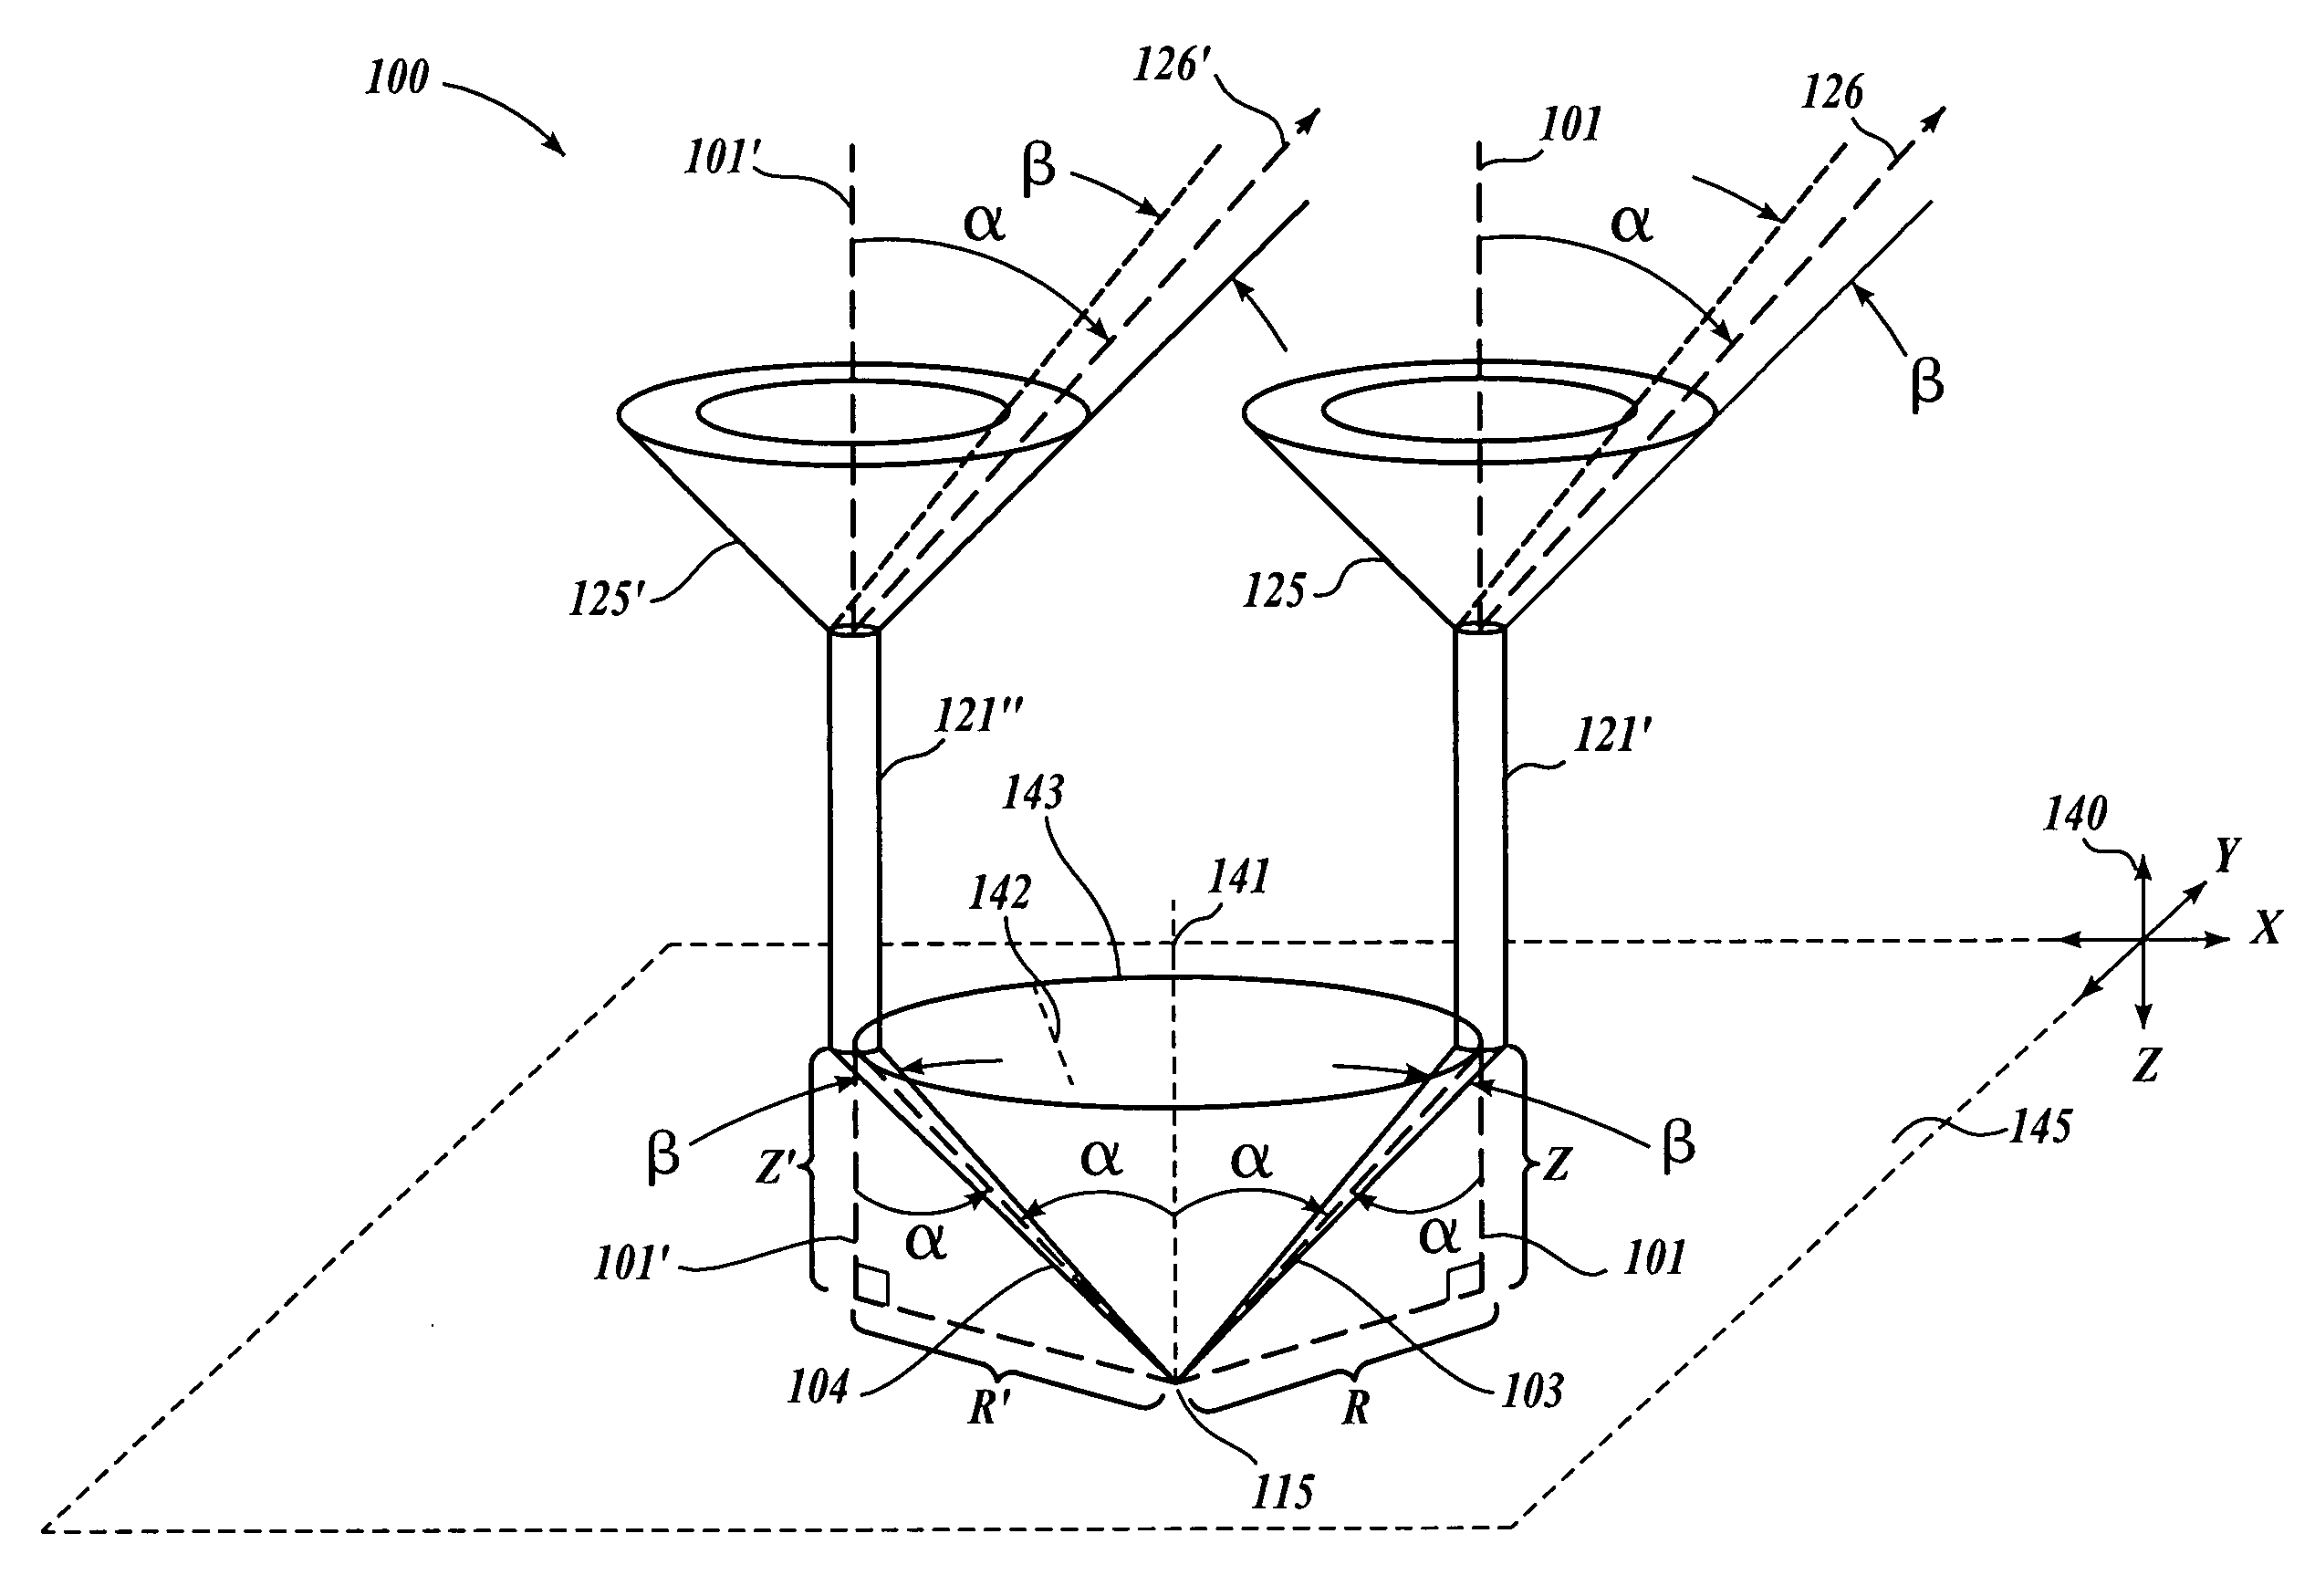 Optical path array and angular filter for translation and orientation sensing